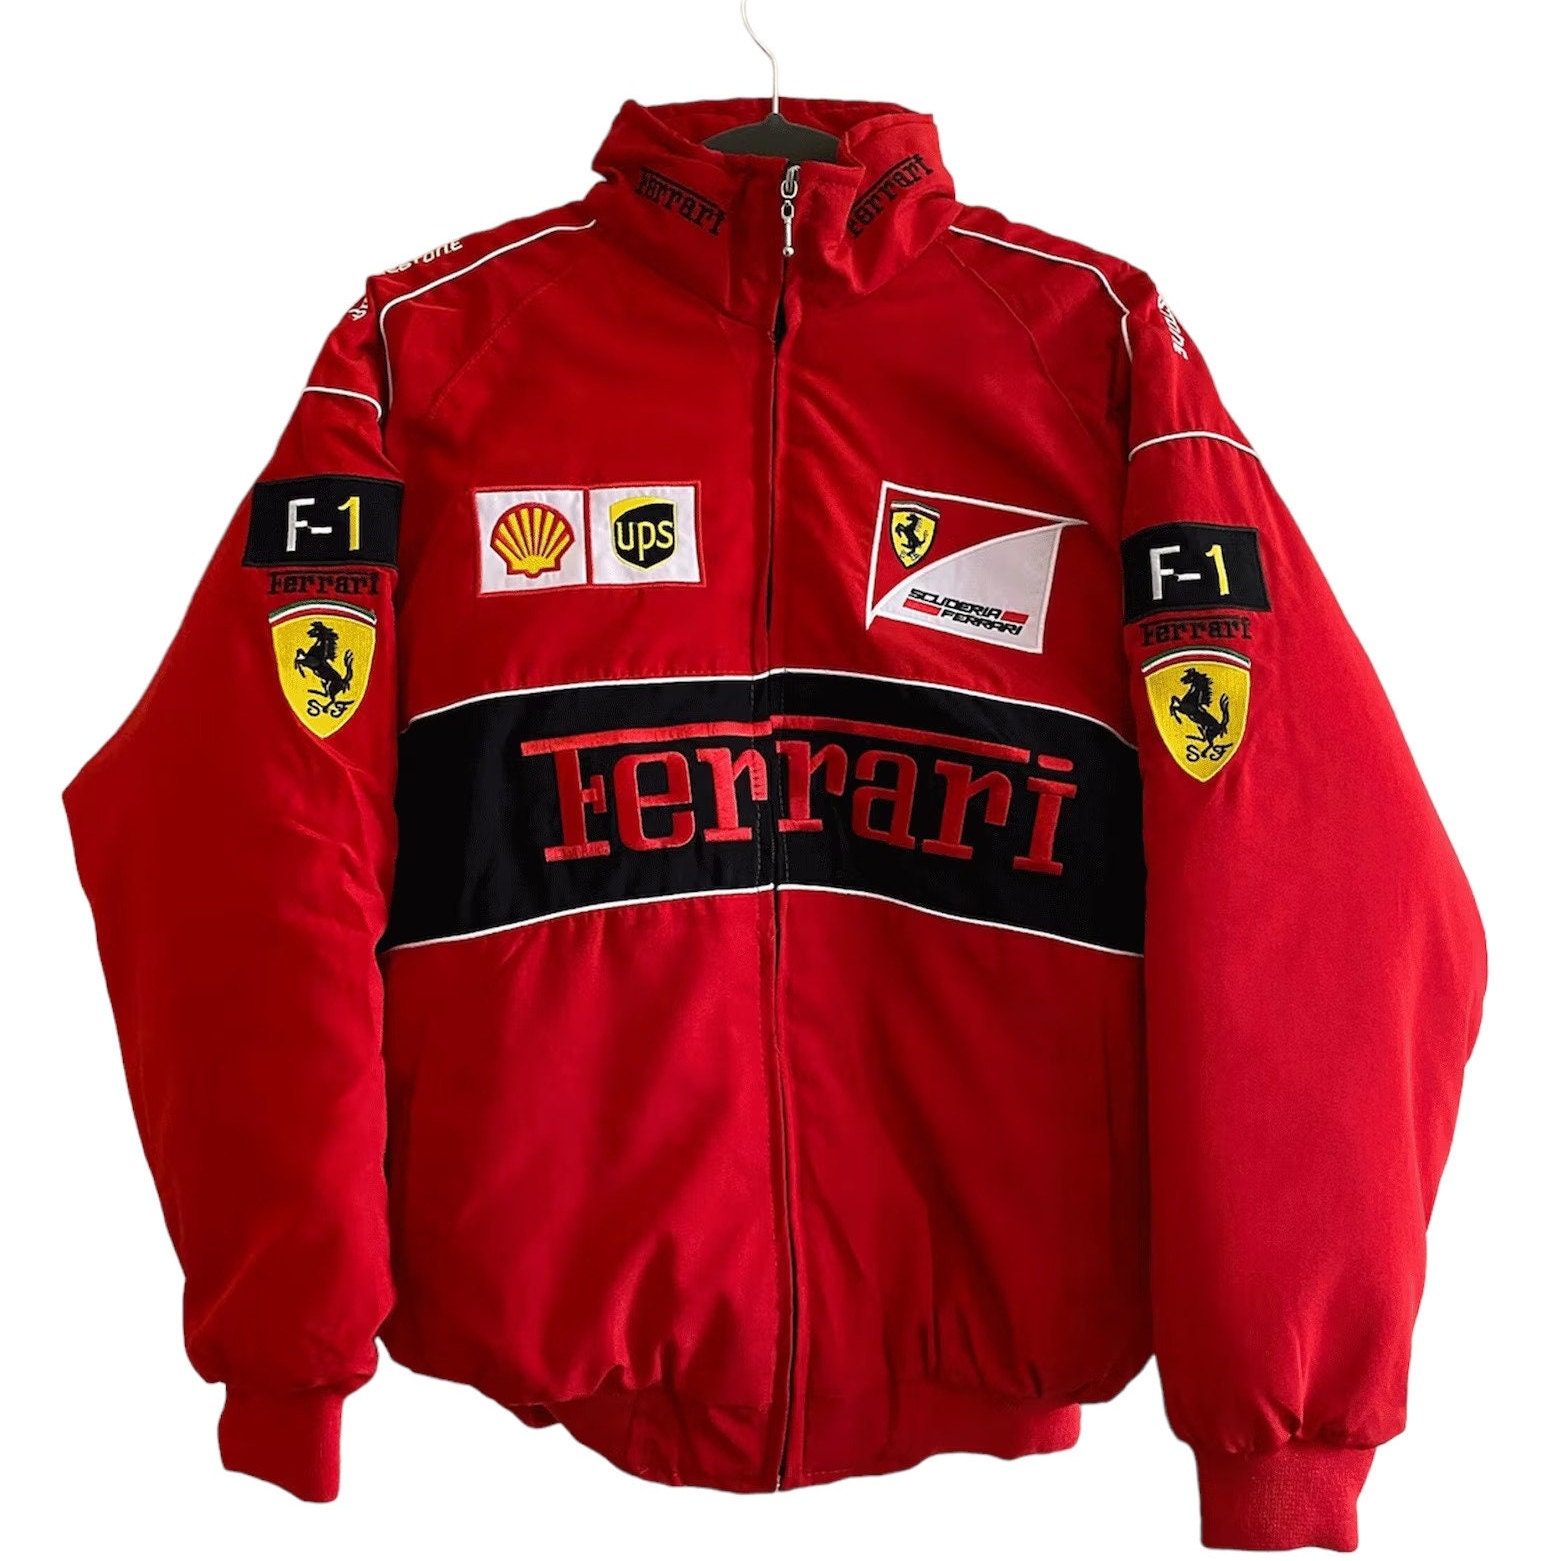 Buy F1 Ferrari Vinage Racing Jacket Red Embroidered Online in